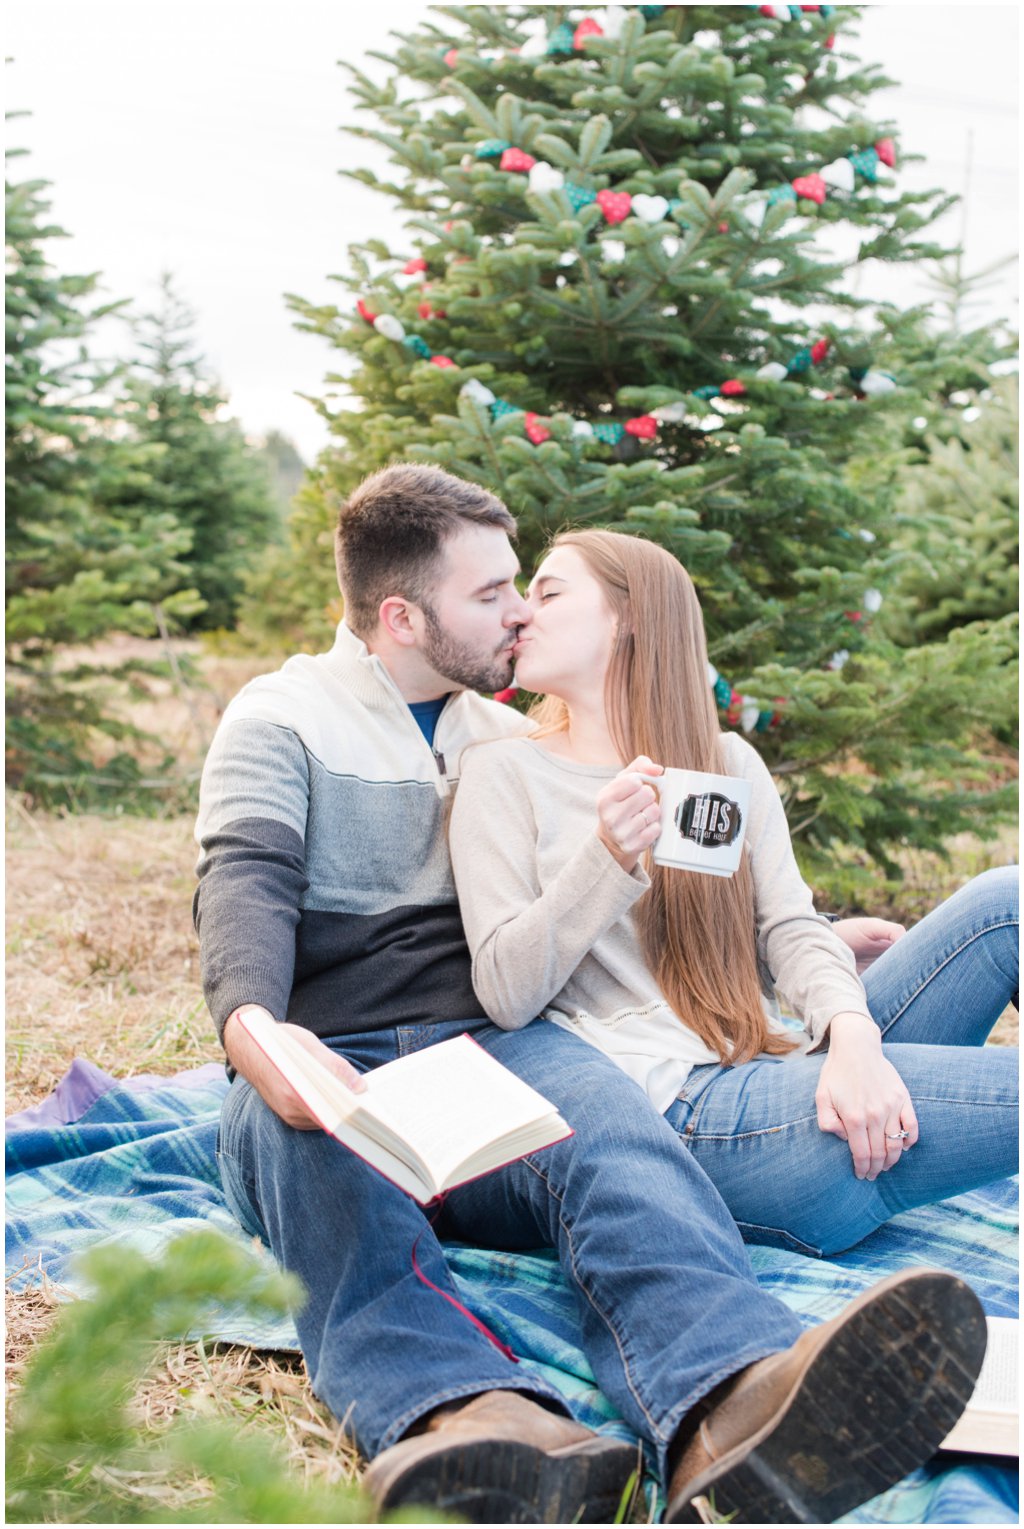 Perfect Christmas Tree Farm_Katie and Zack Engagement Photo_0018